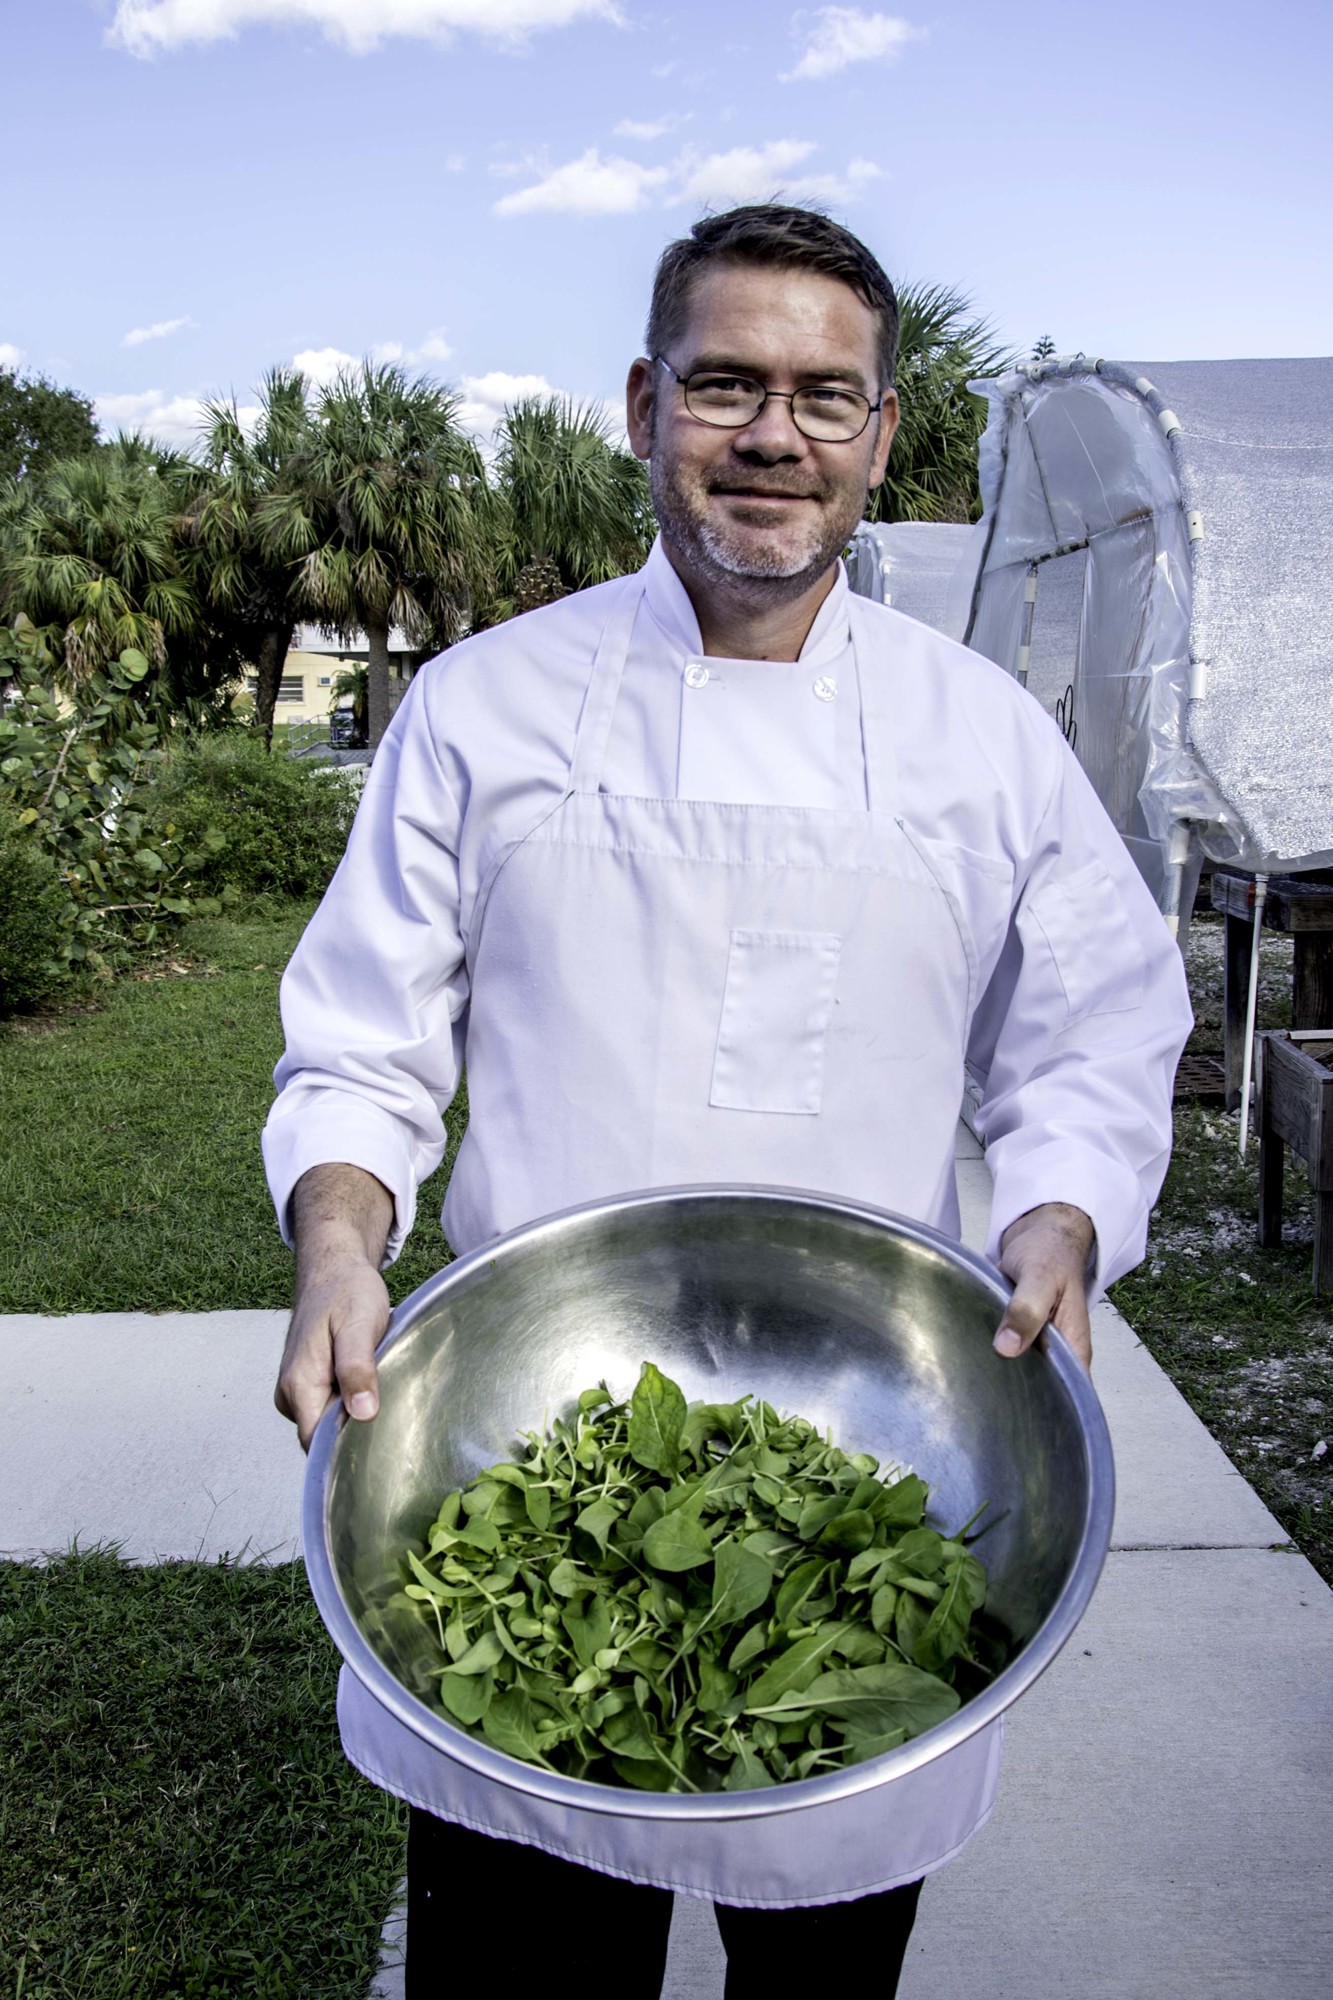 Courtesy photo Veteran Brett Jones shows off his fresh ingredients at the 2017 Veterans Farm-to-Table Dinner during Eat Local Week. Courtesy photo